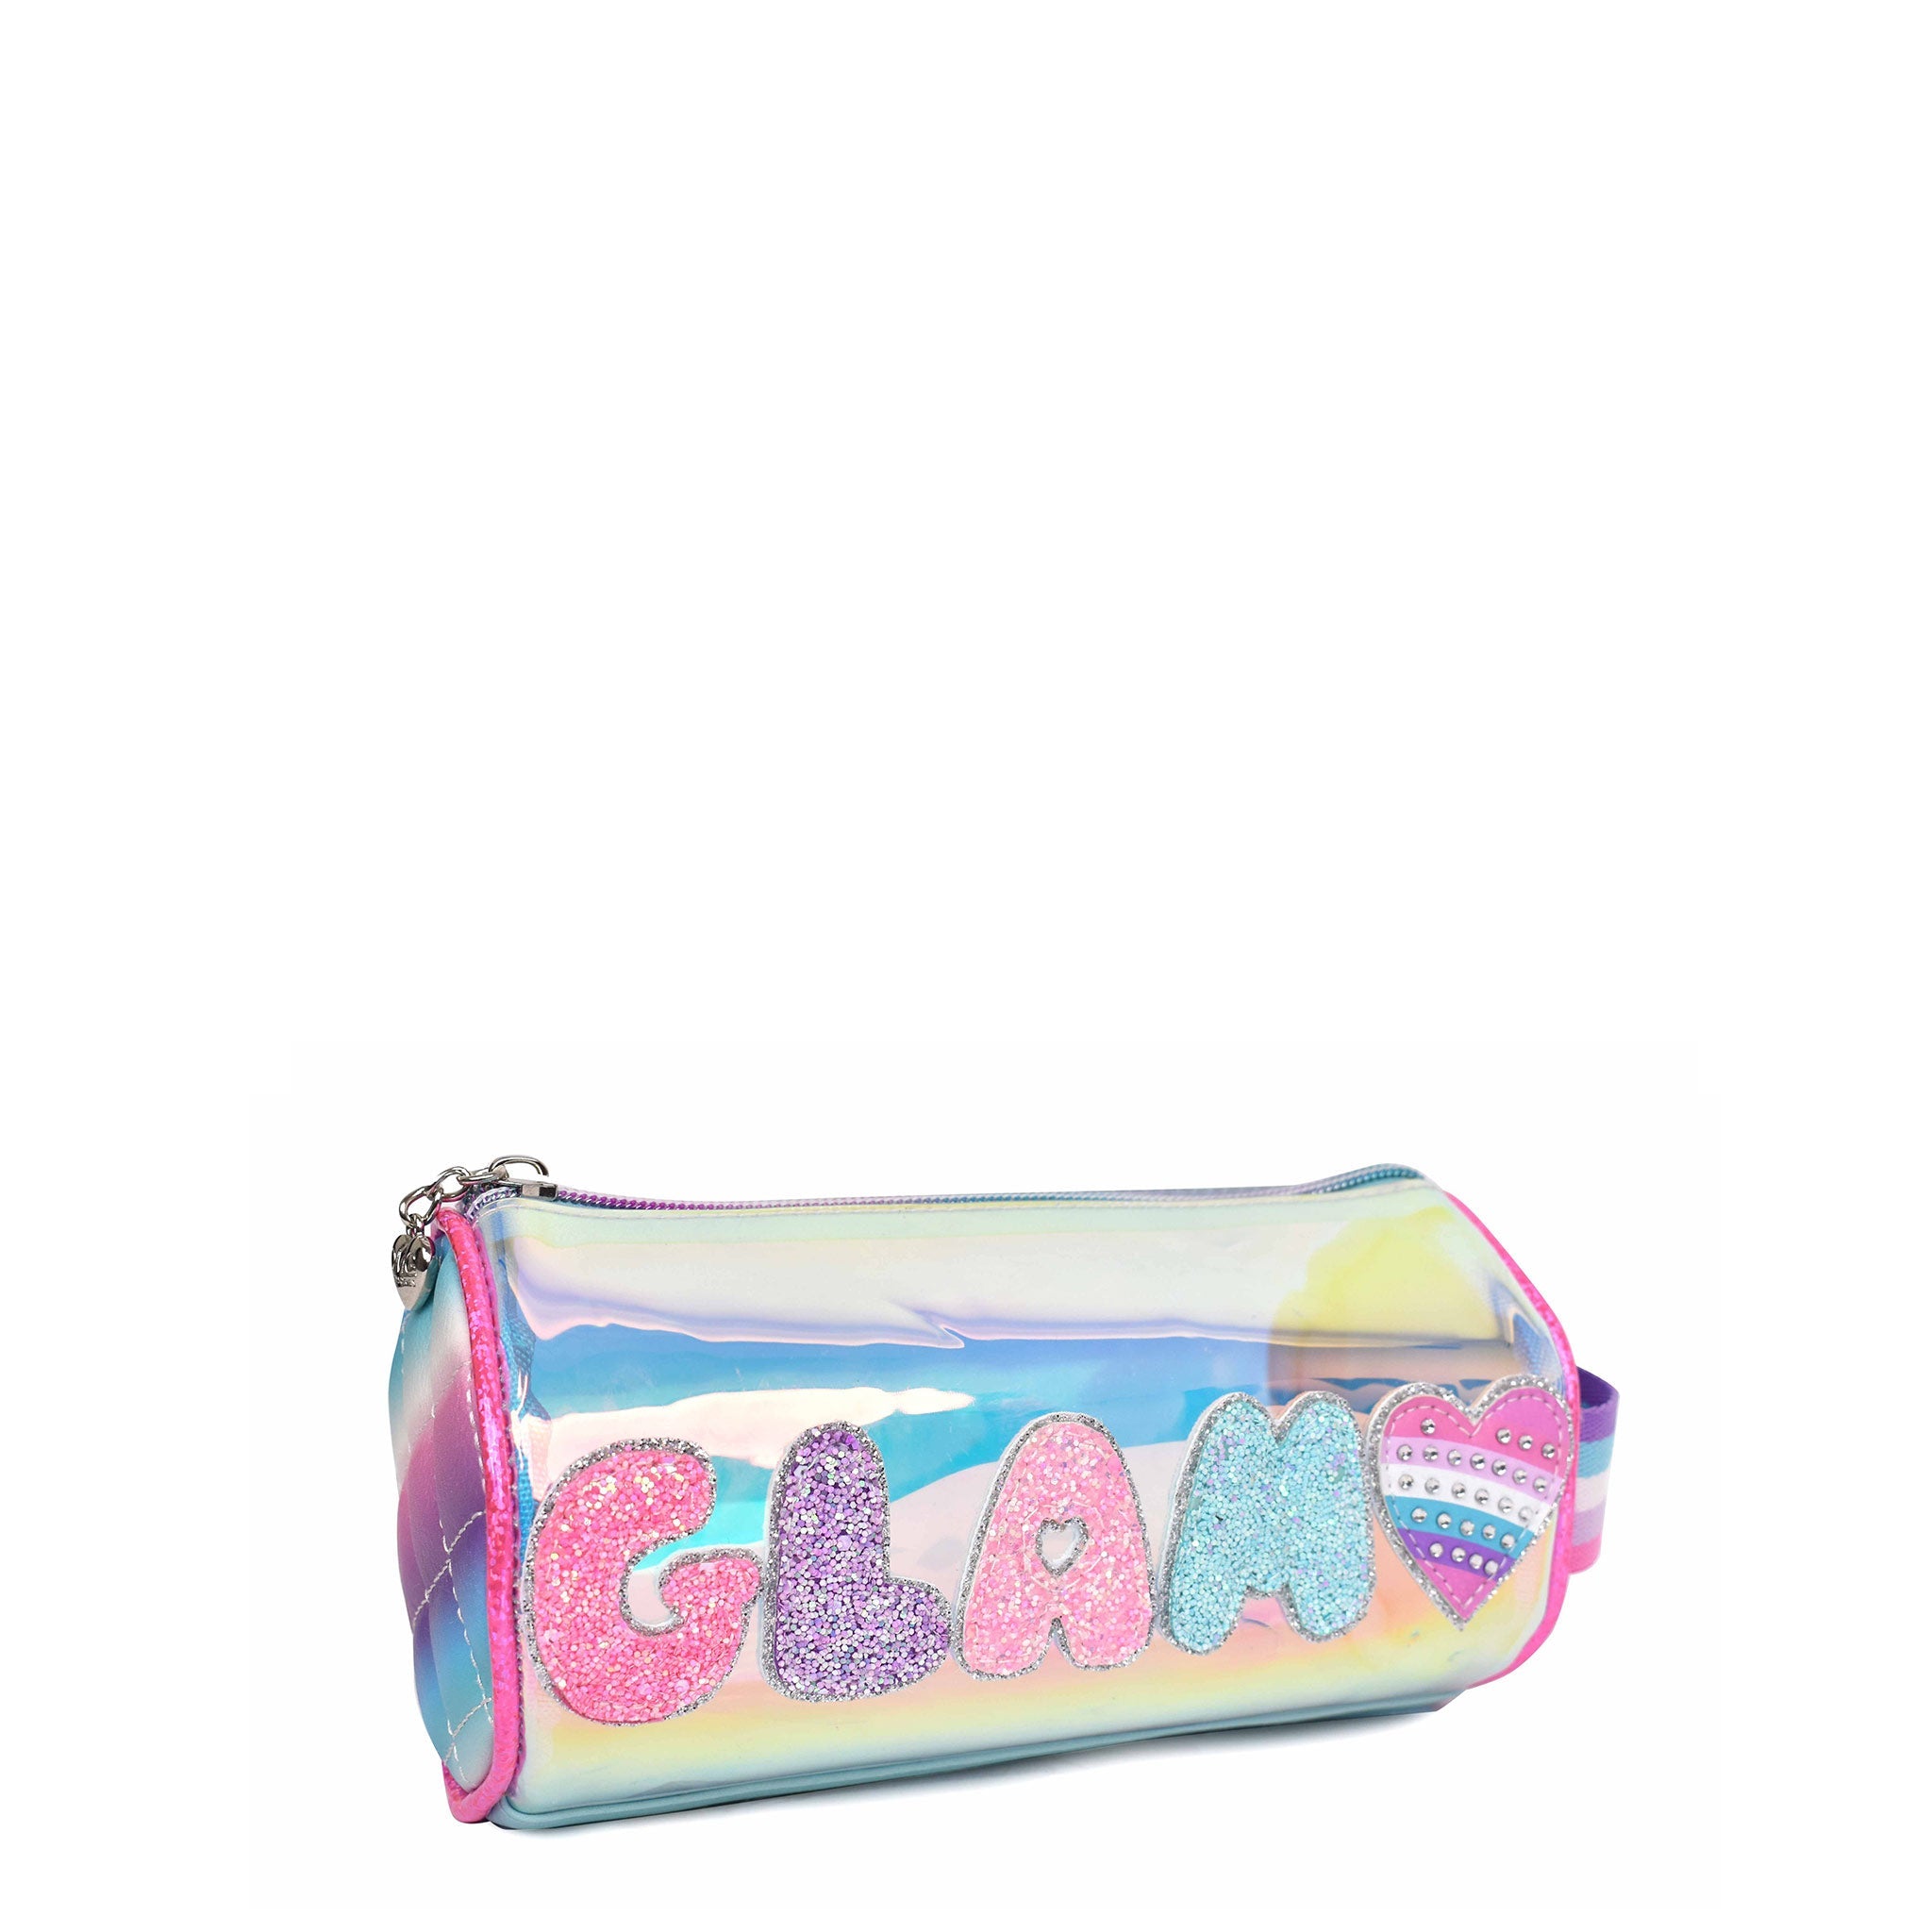 Side  view of a glazed tube pouch with glitter bubble letters 'GLAM' and a rhinestone heart appliqué